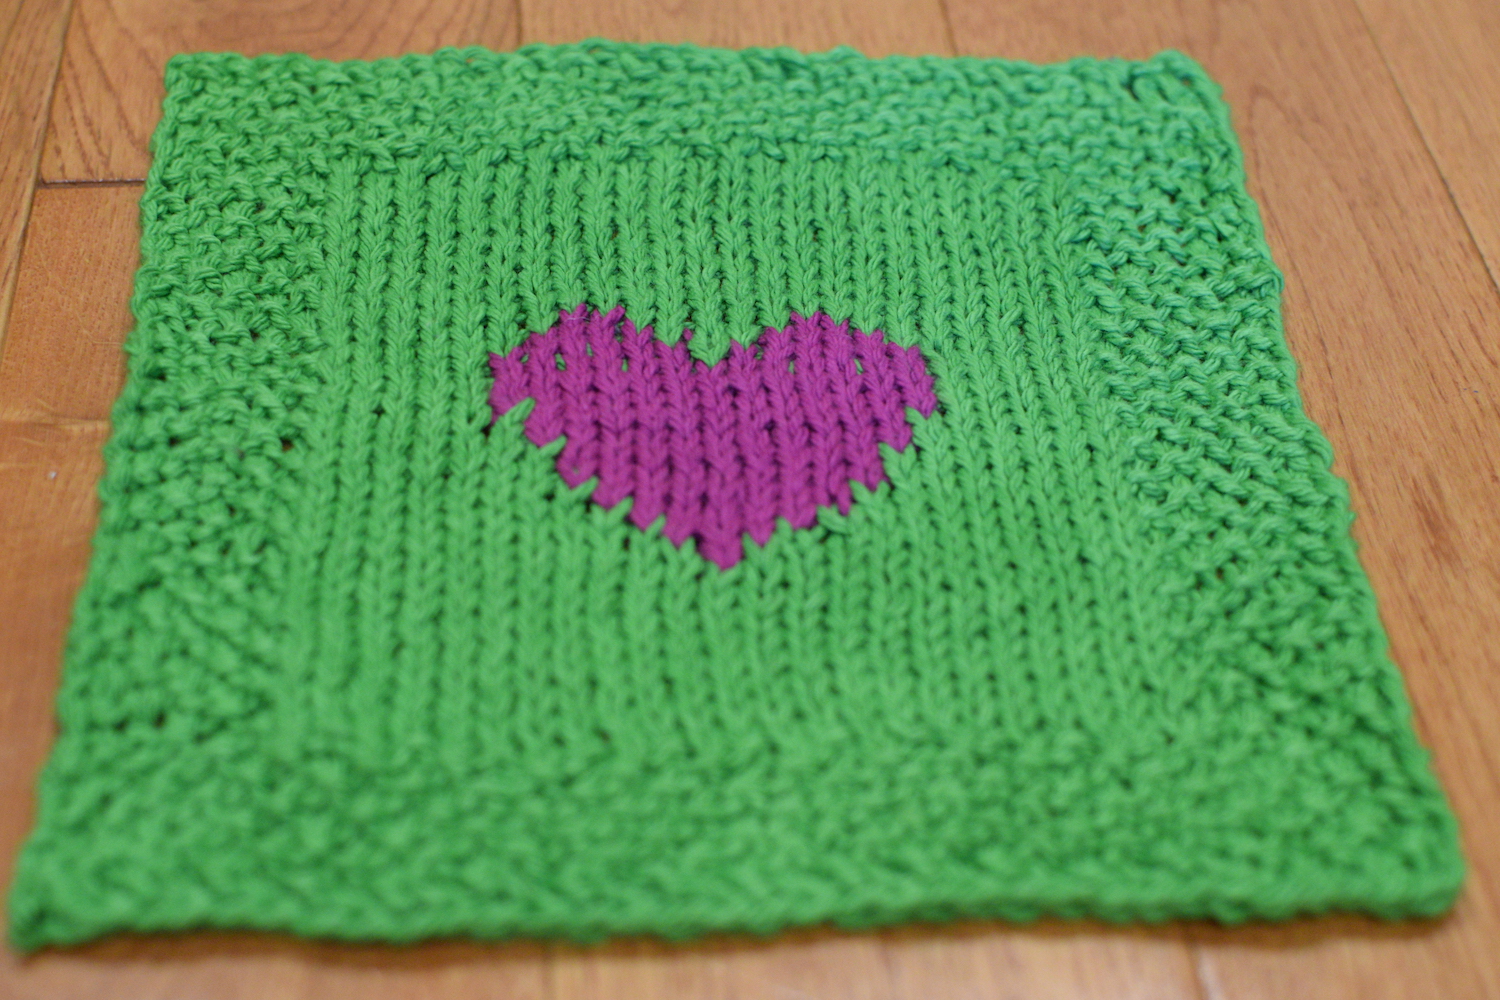 Easy to knit heart dishcloth using 2 colors.  The heart is sitting in the center and surrounded by seed stitch border.  